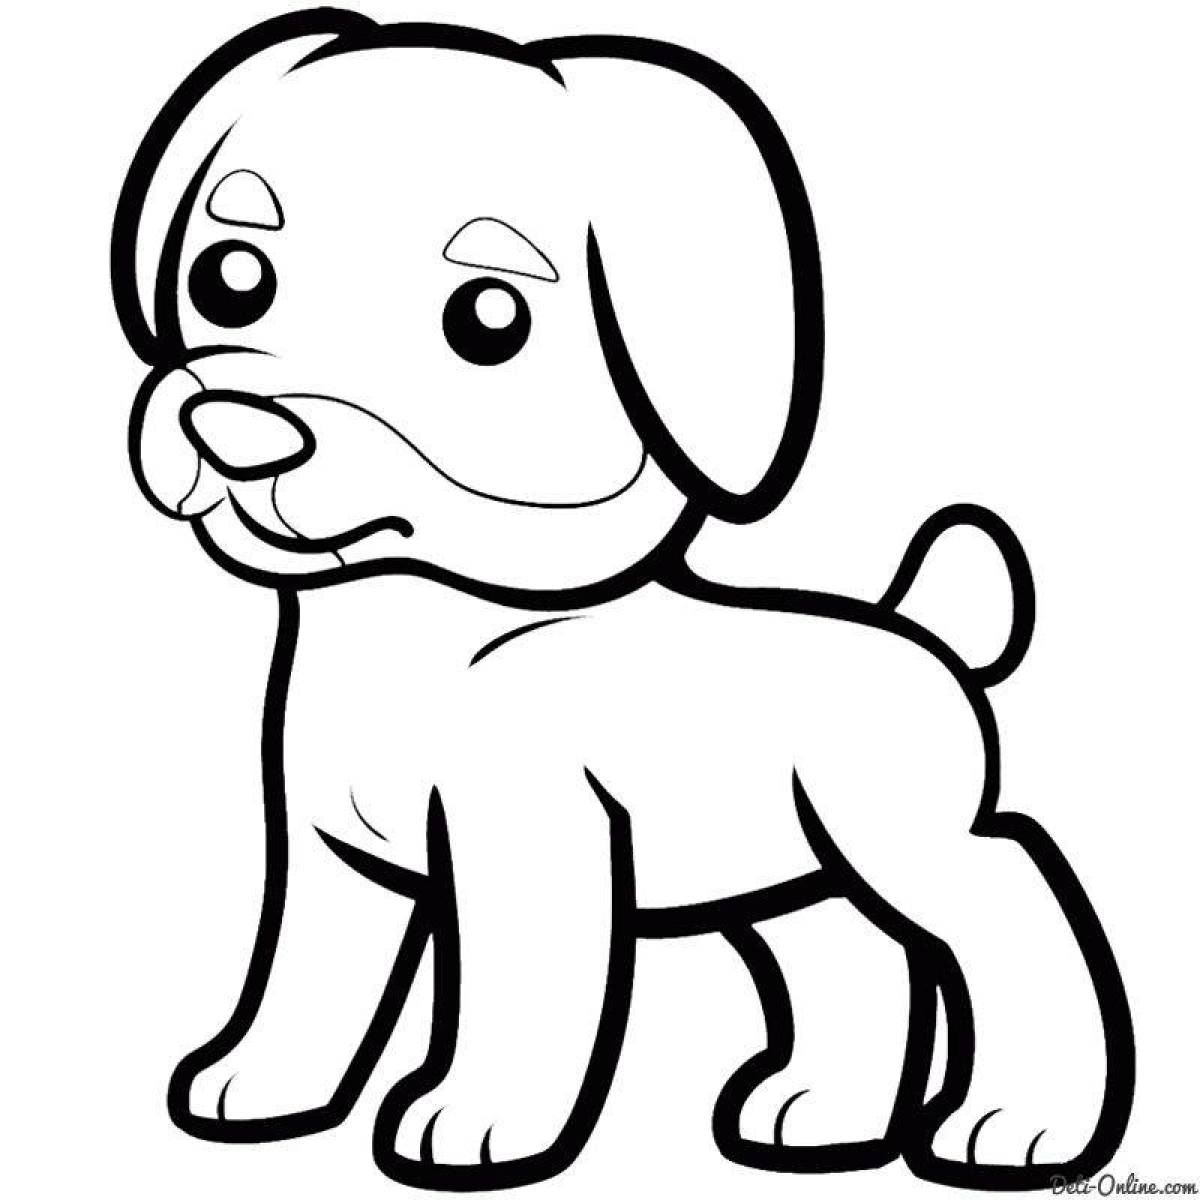 Coloring page playful dog